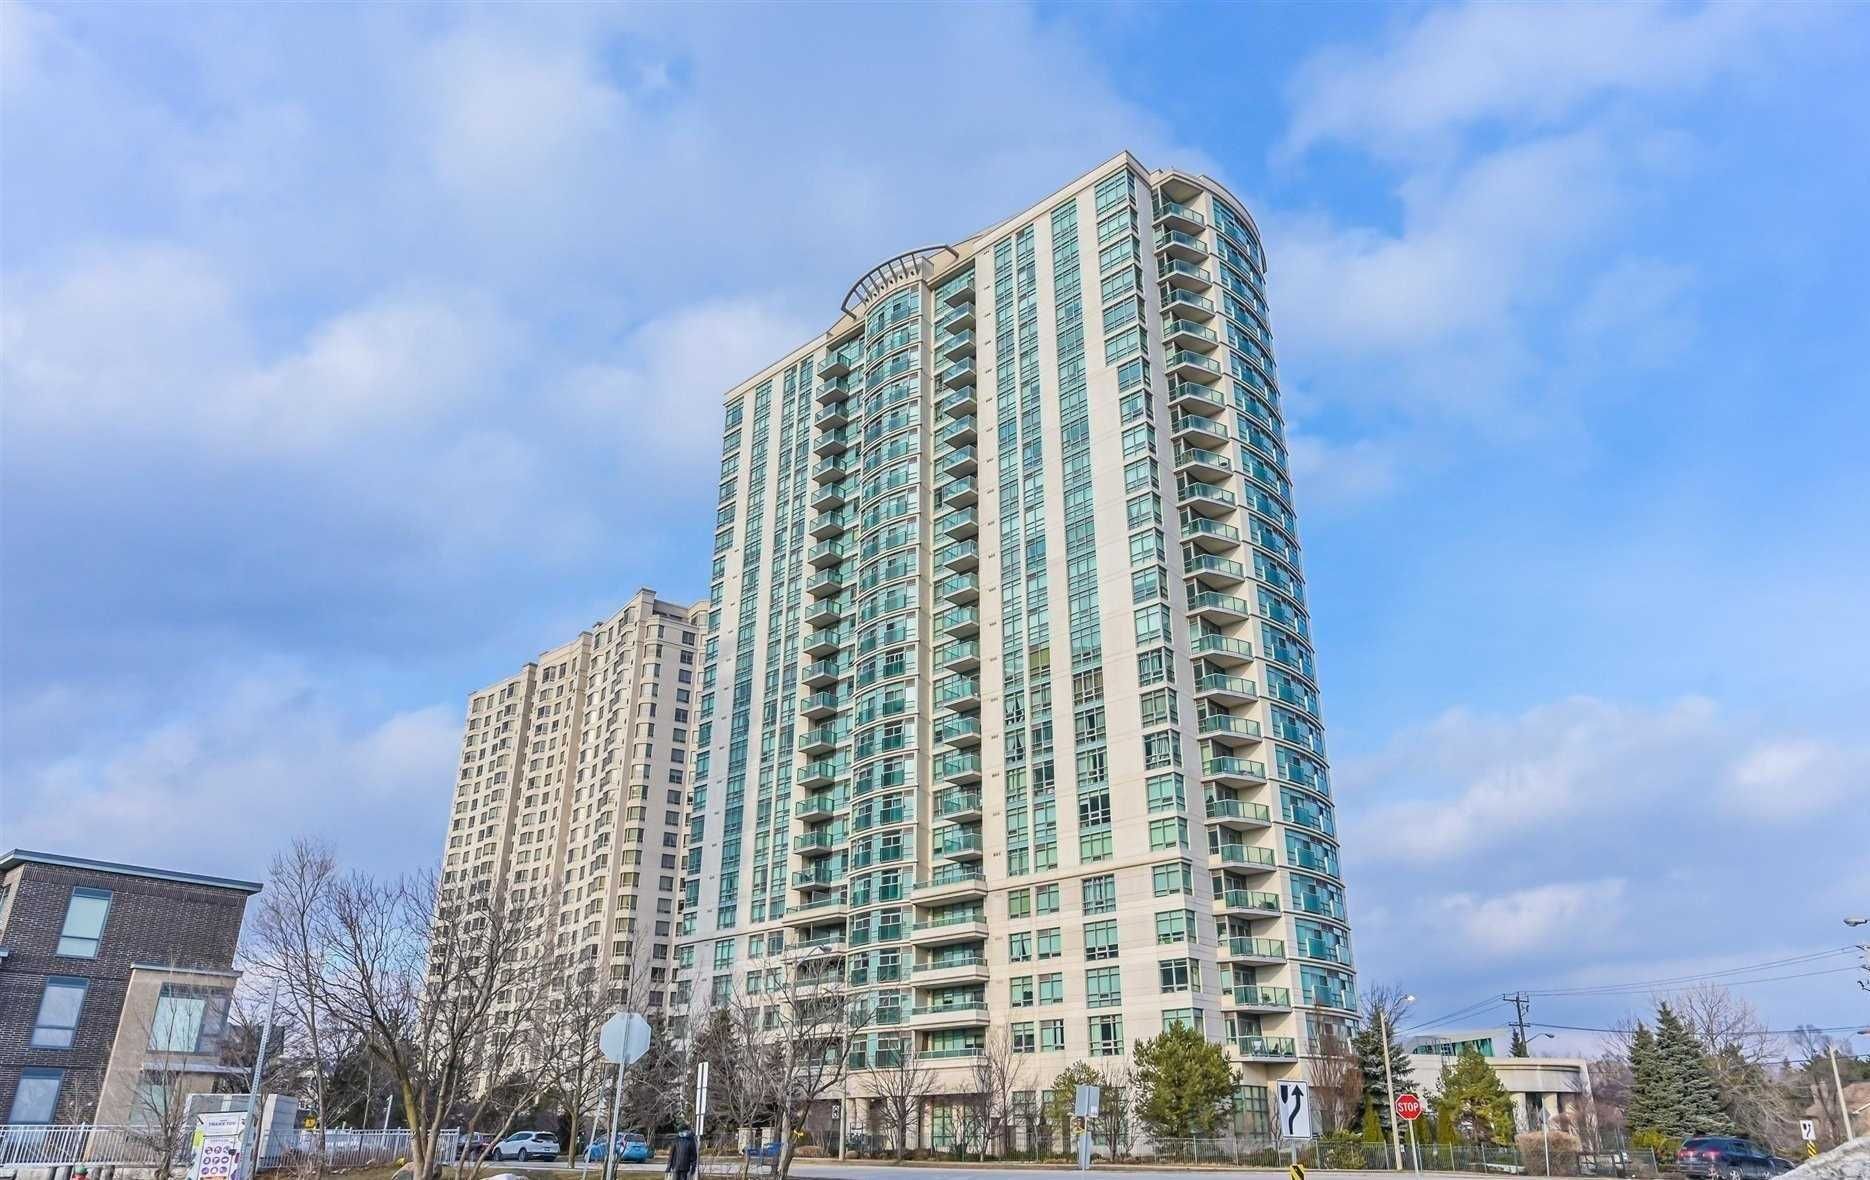 238 Bonis Ave. This condo at Legends at Tam O'Shanter is located in  Scarborough, Toronto - image #1 of 2 by Strata.ca